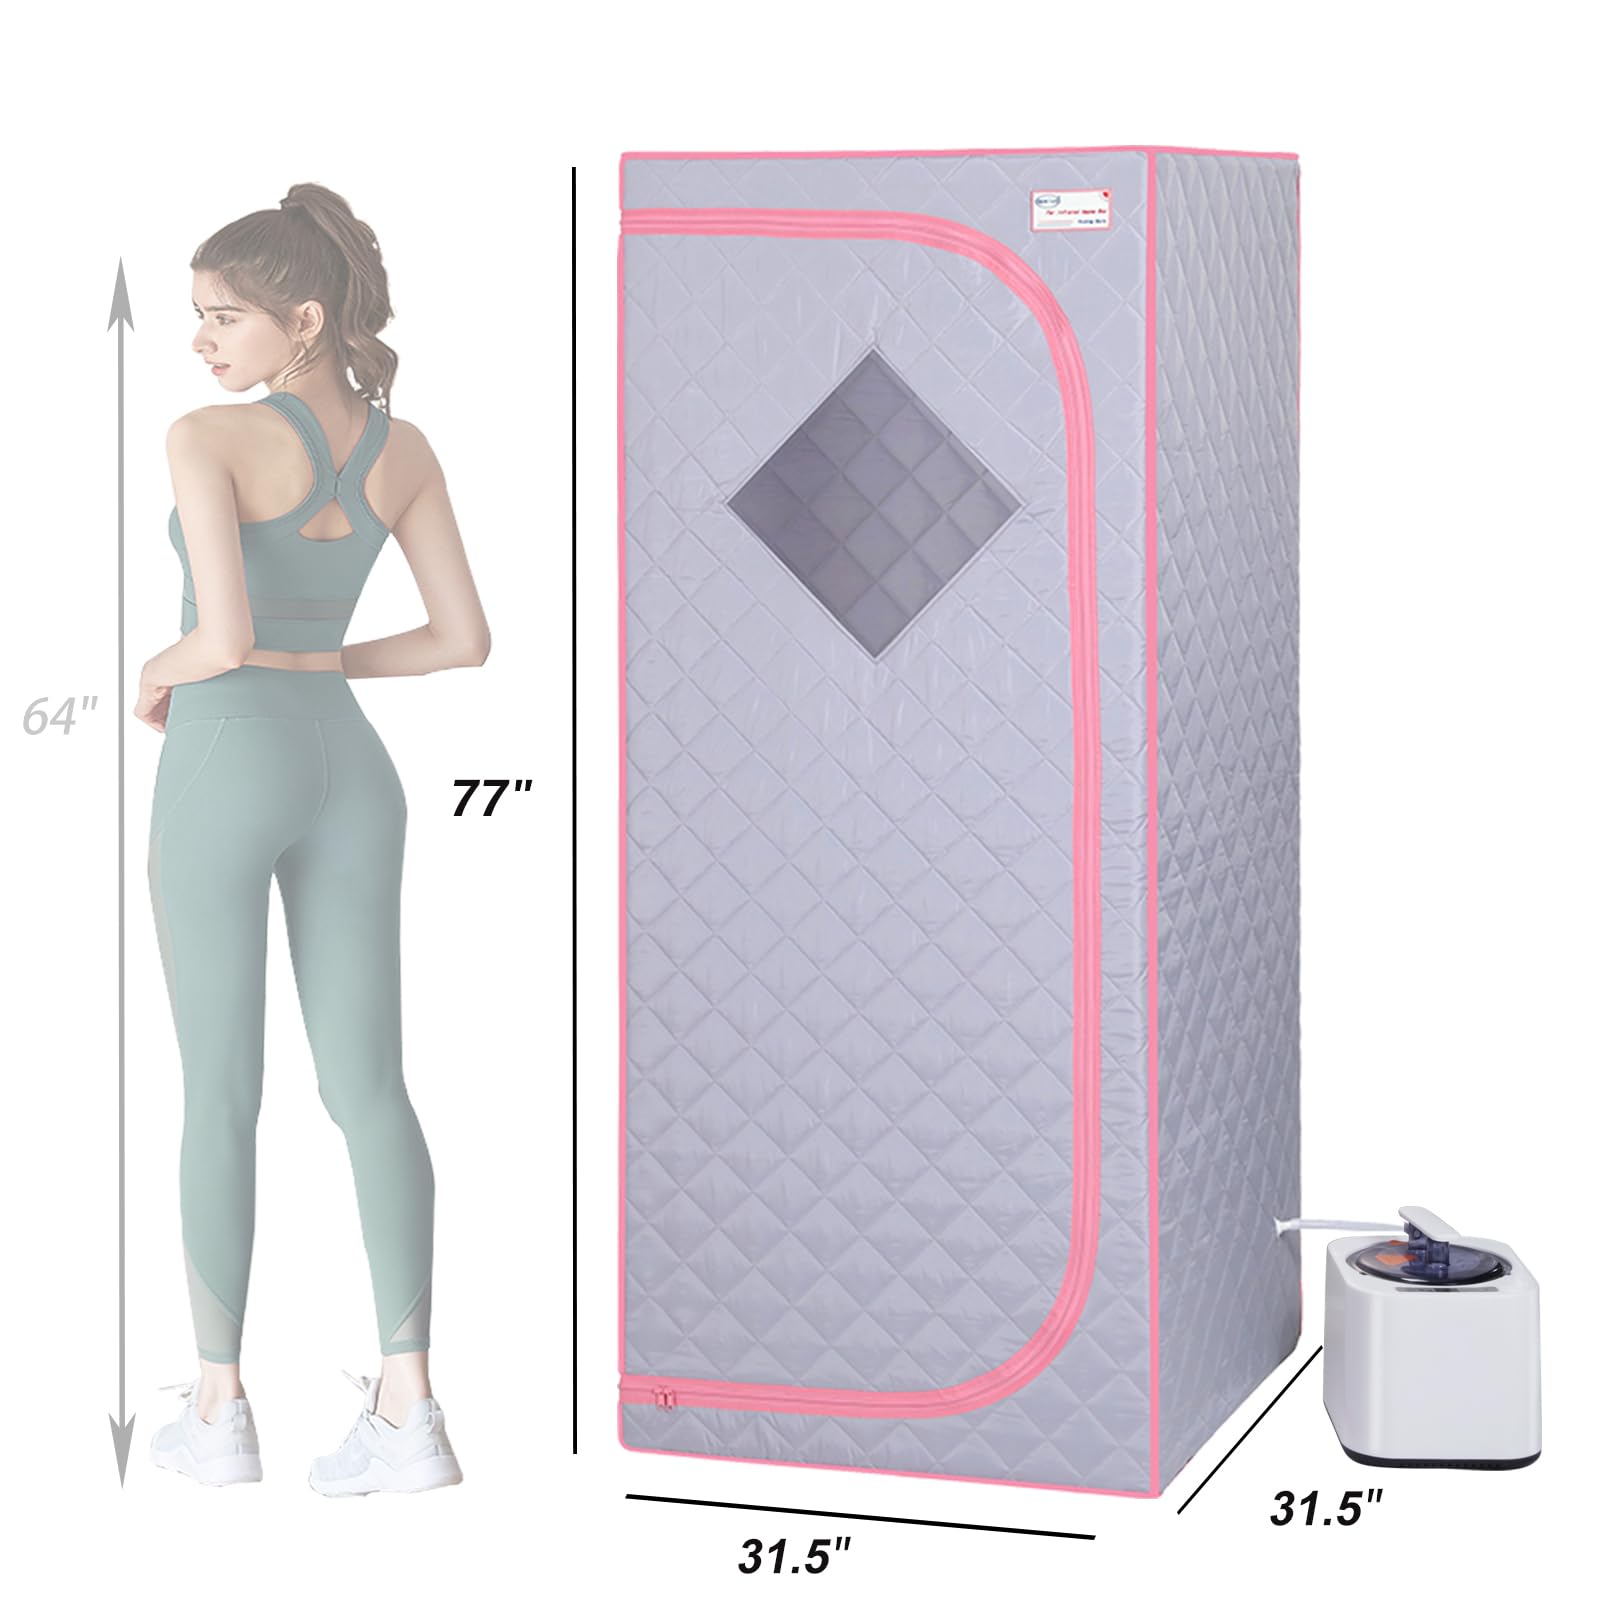 Kanlanth Portable Sauna Full Size Personal Steam Sauna for Home, 2.2L 1000 Watt Steam Generator, 60 Minute Timer with Remote Control, Chair Included, Home Sauna Spa Tent for Detox Relaxation, Grey